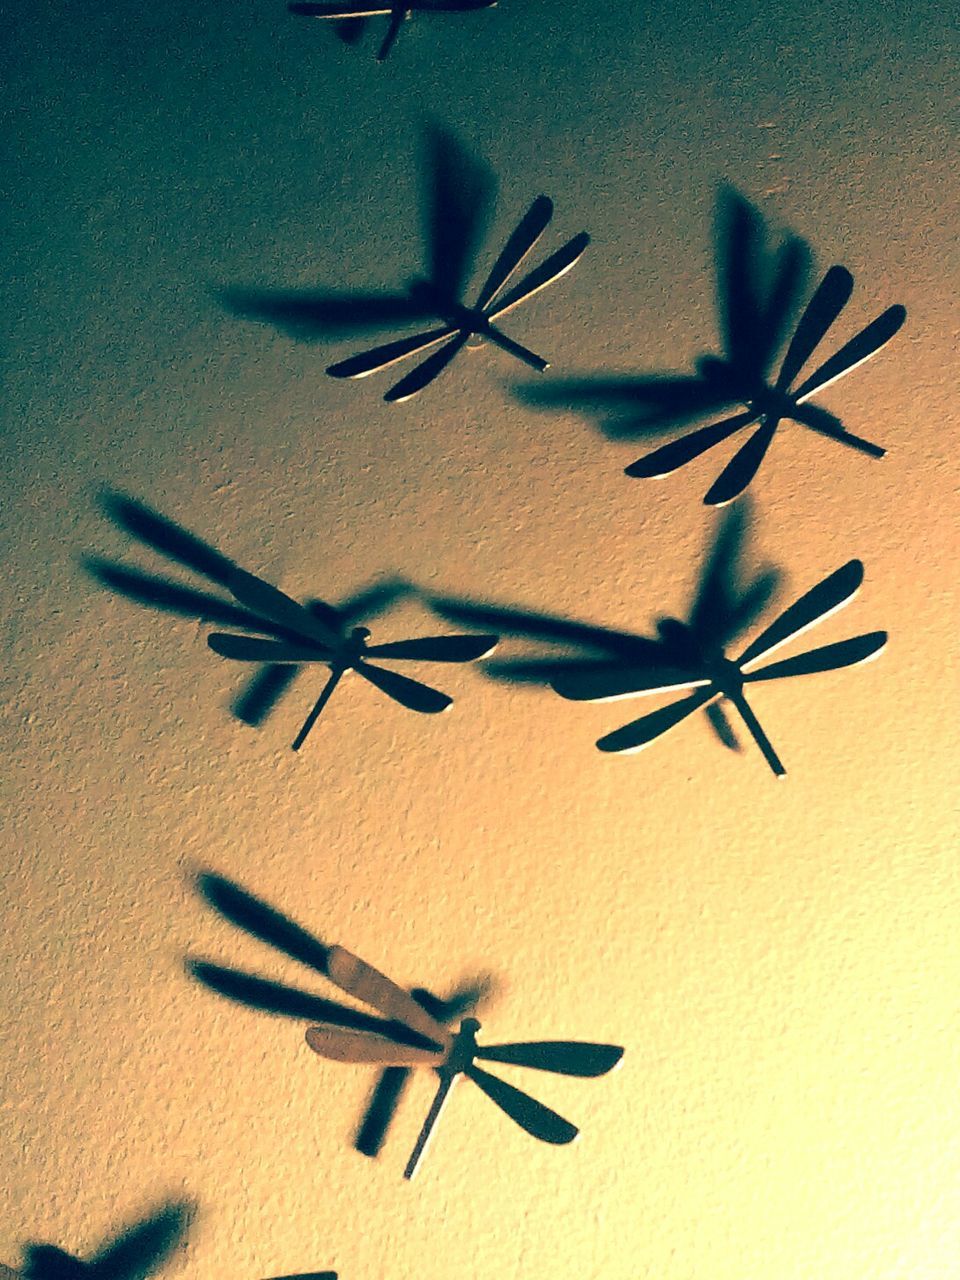 View of artificial dragonfly on wall